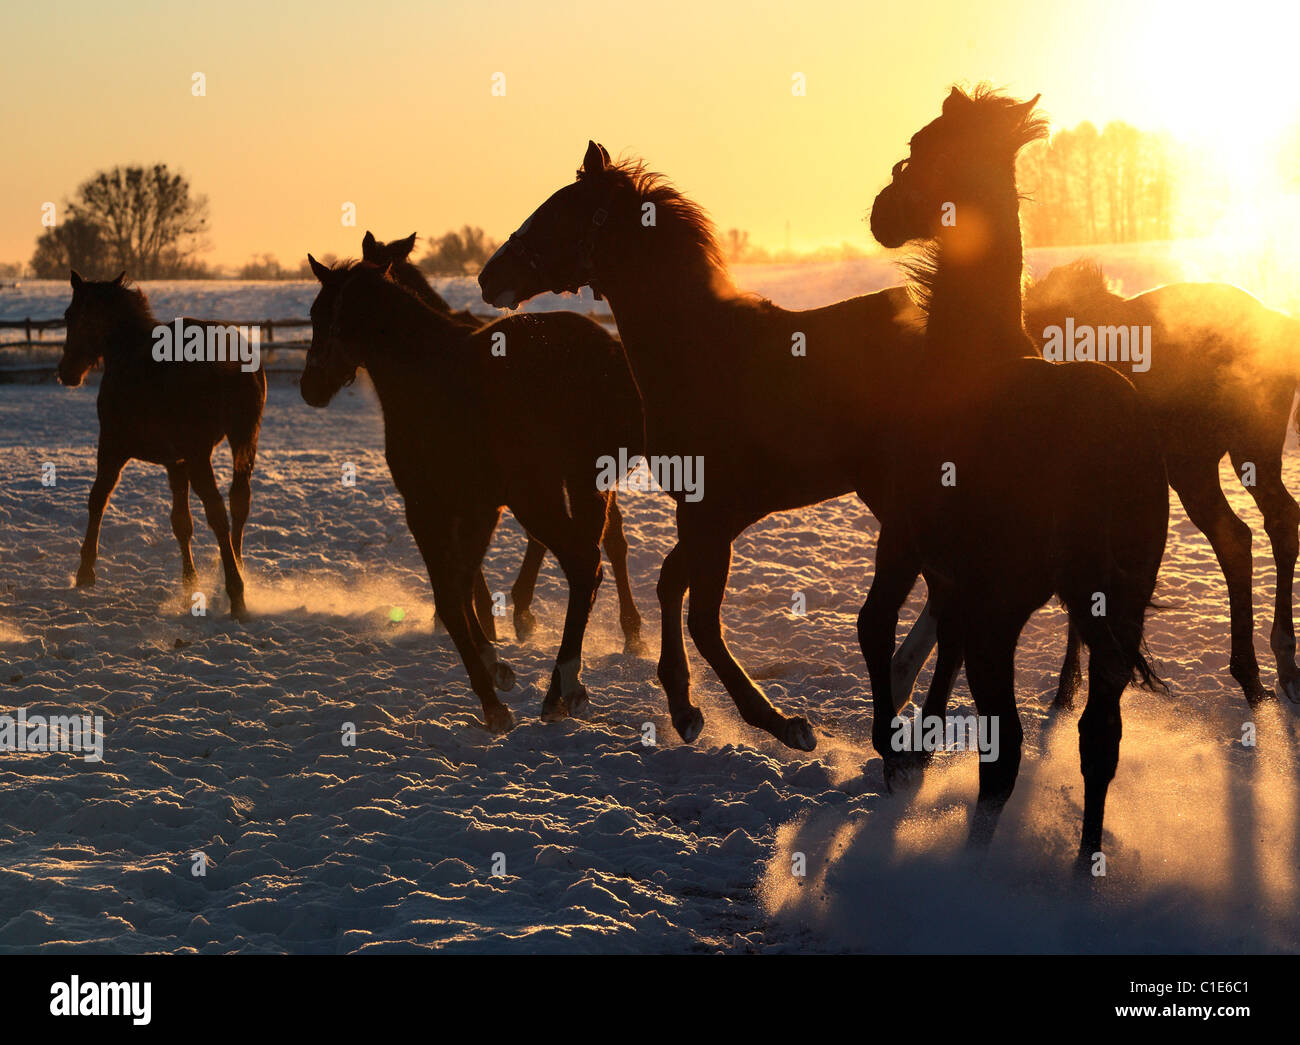 Silhouettes of horses in a paddock at dawn, Goerlsdorf, Germany Stock Photo